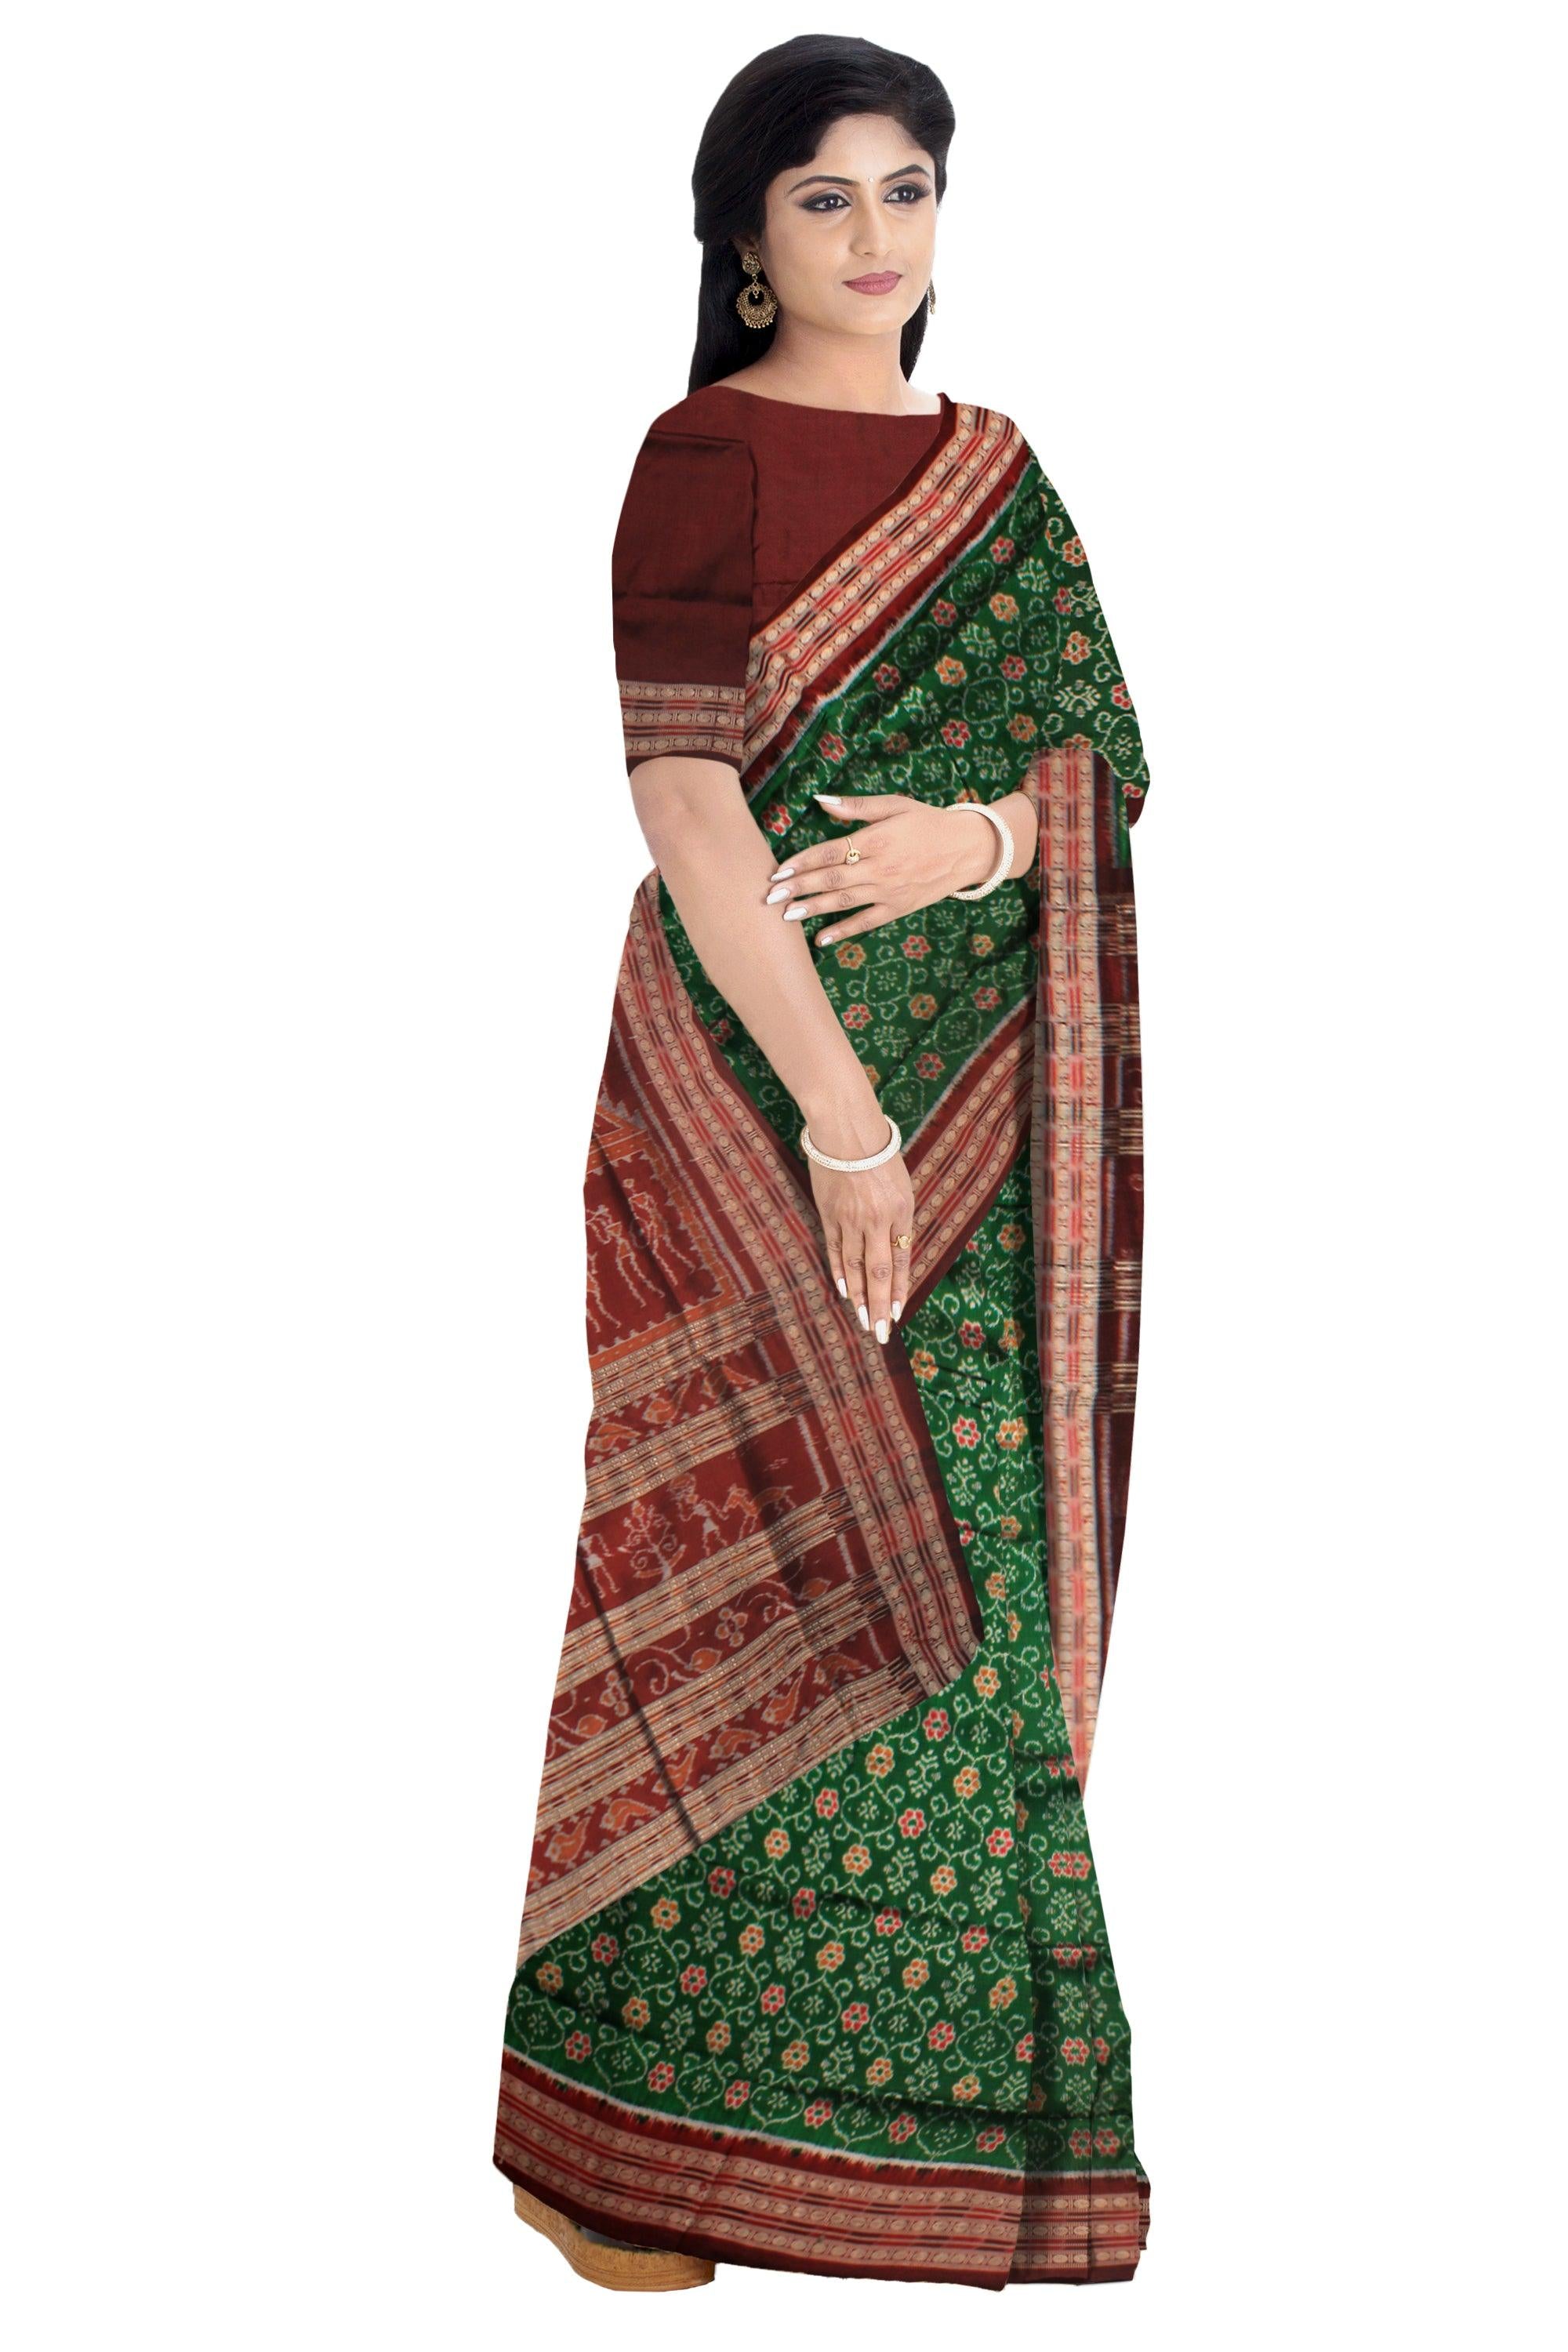 PERSIAN GREEN AND  COFFEE COLOR SONEPUR PURE SILK  SAREE IN BANDHA DESIGN , WITH BLOUSE PIECE. - Koshali Arts & Crafts Enterprise